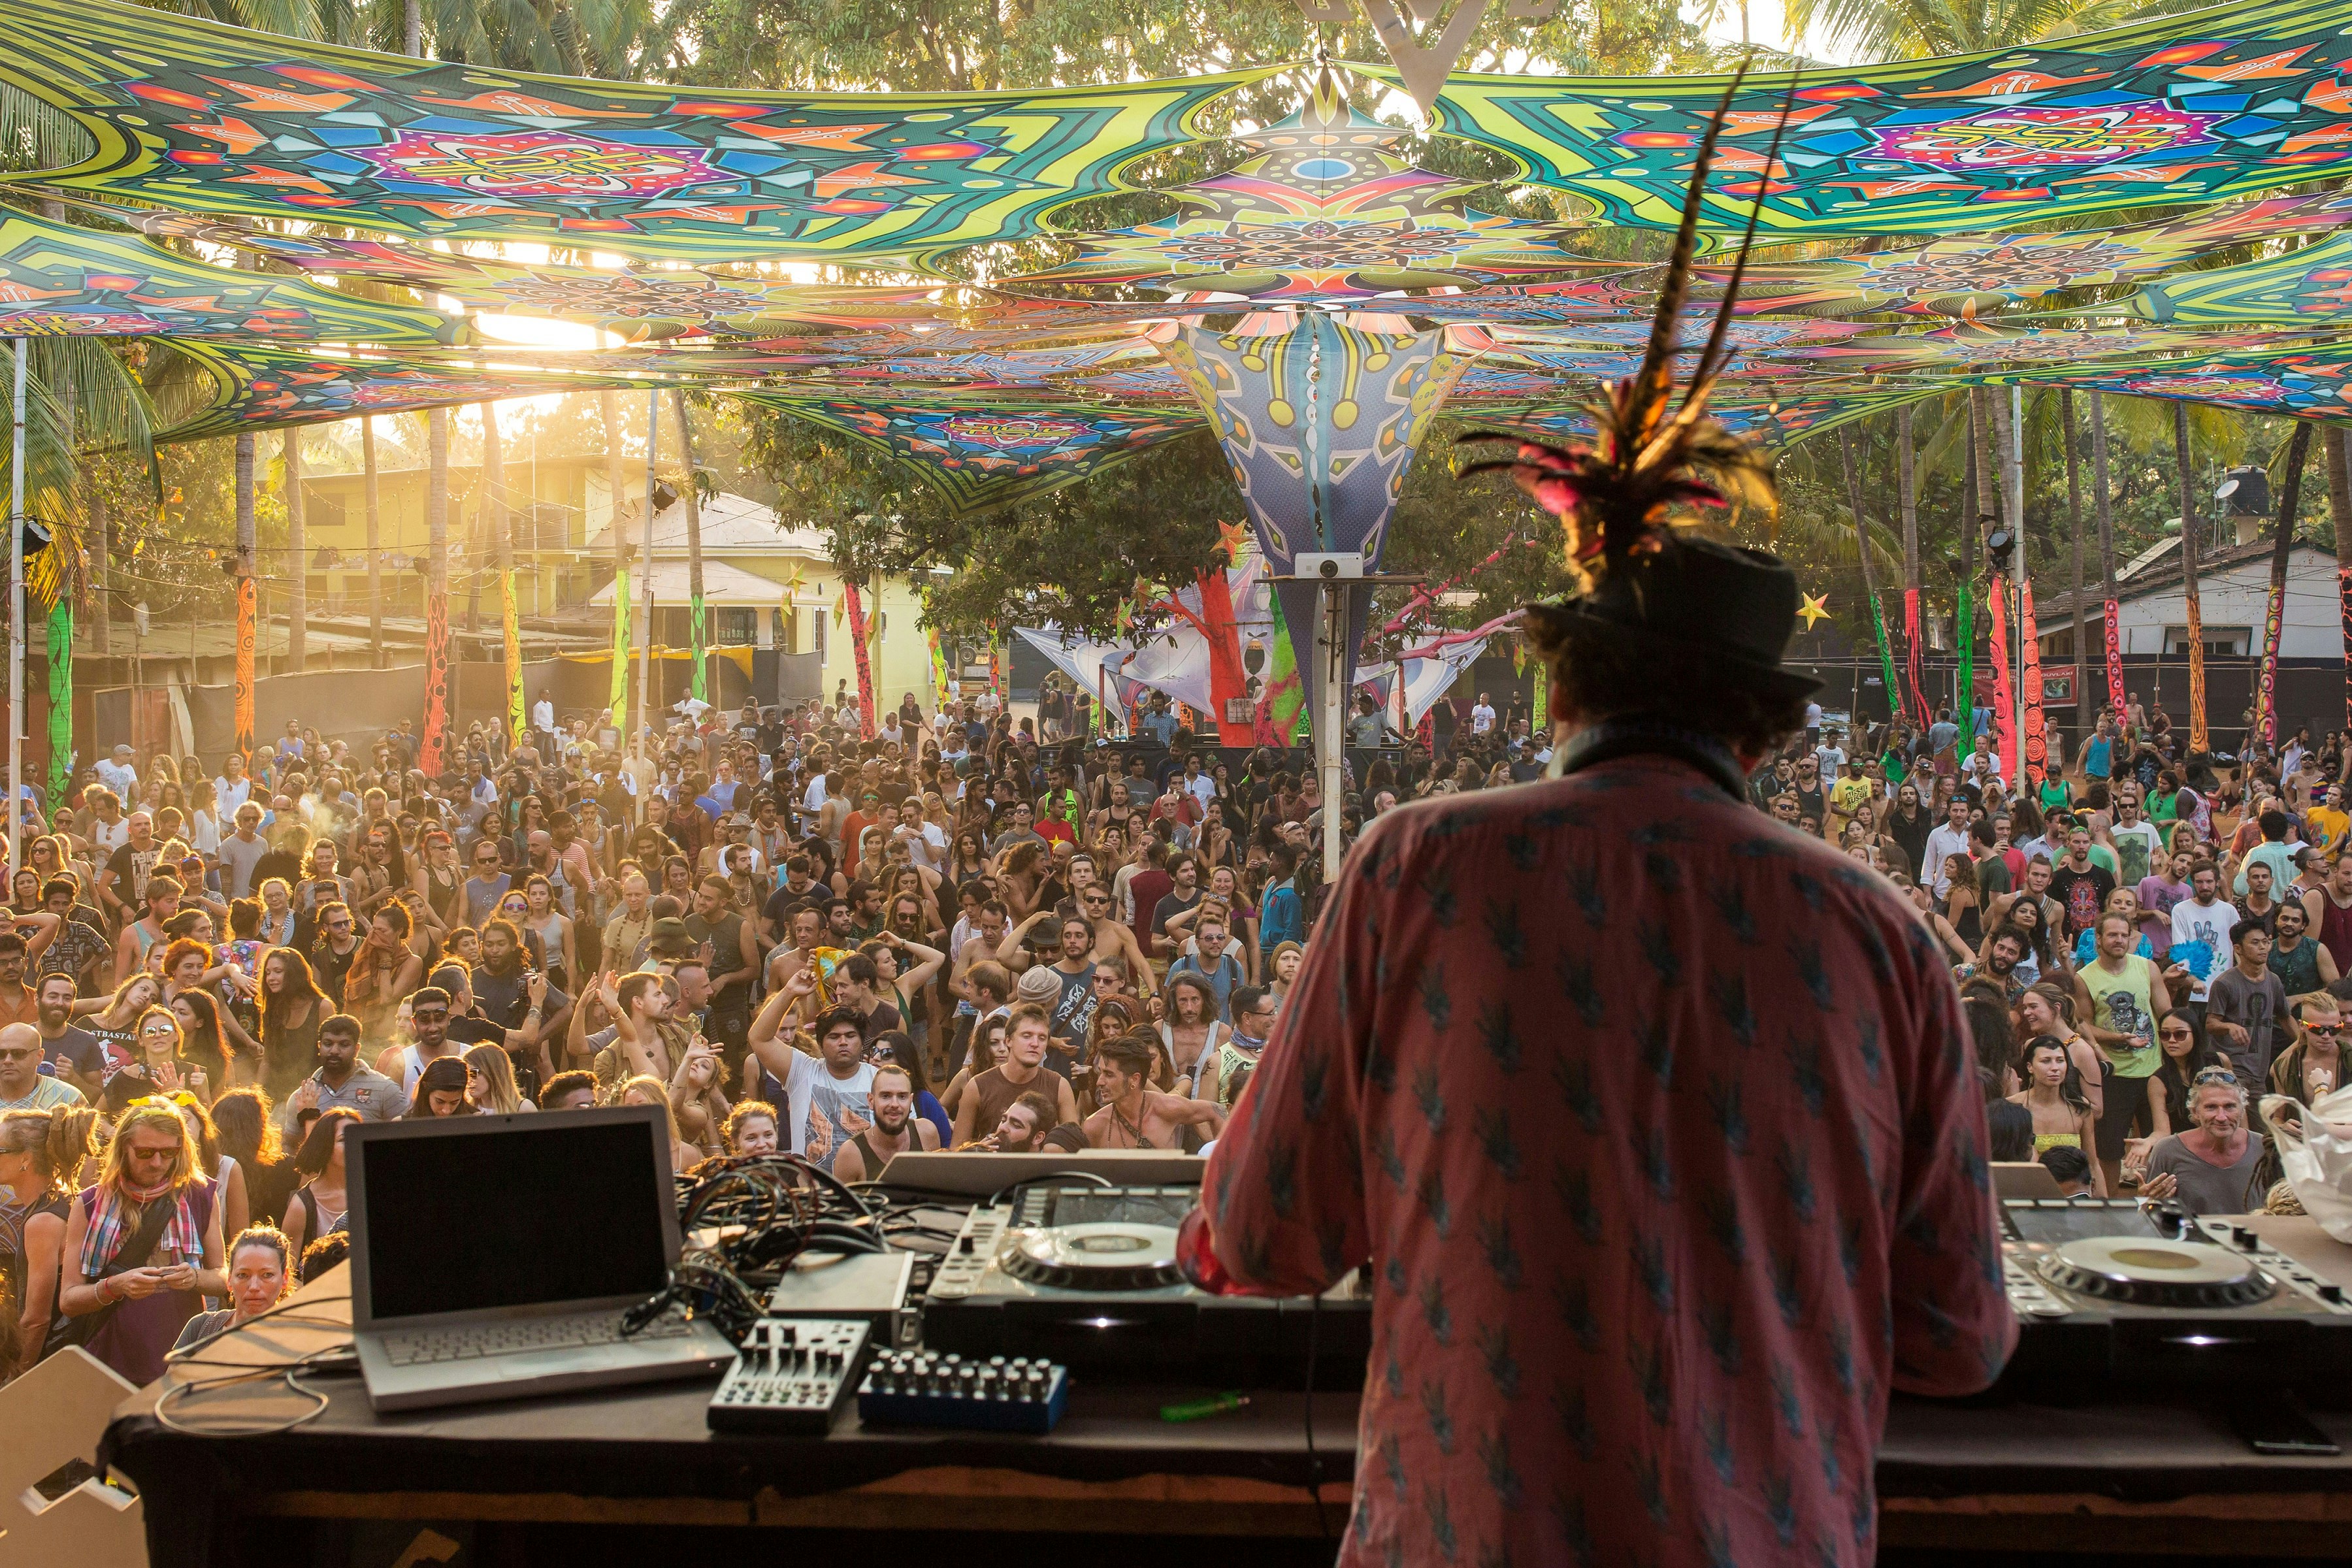 A DJ, on a raised stage, spins the decks in front of a large crowd at HillTribe club in Goa.